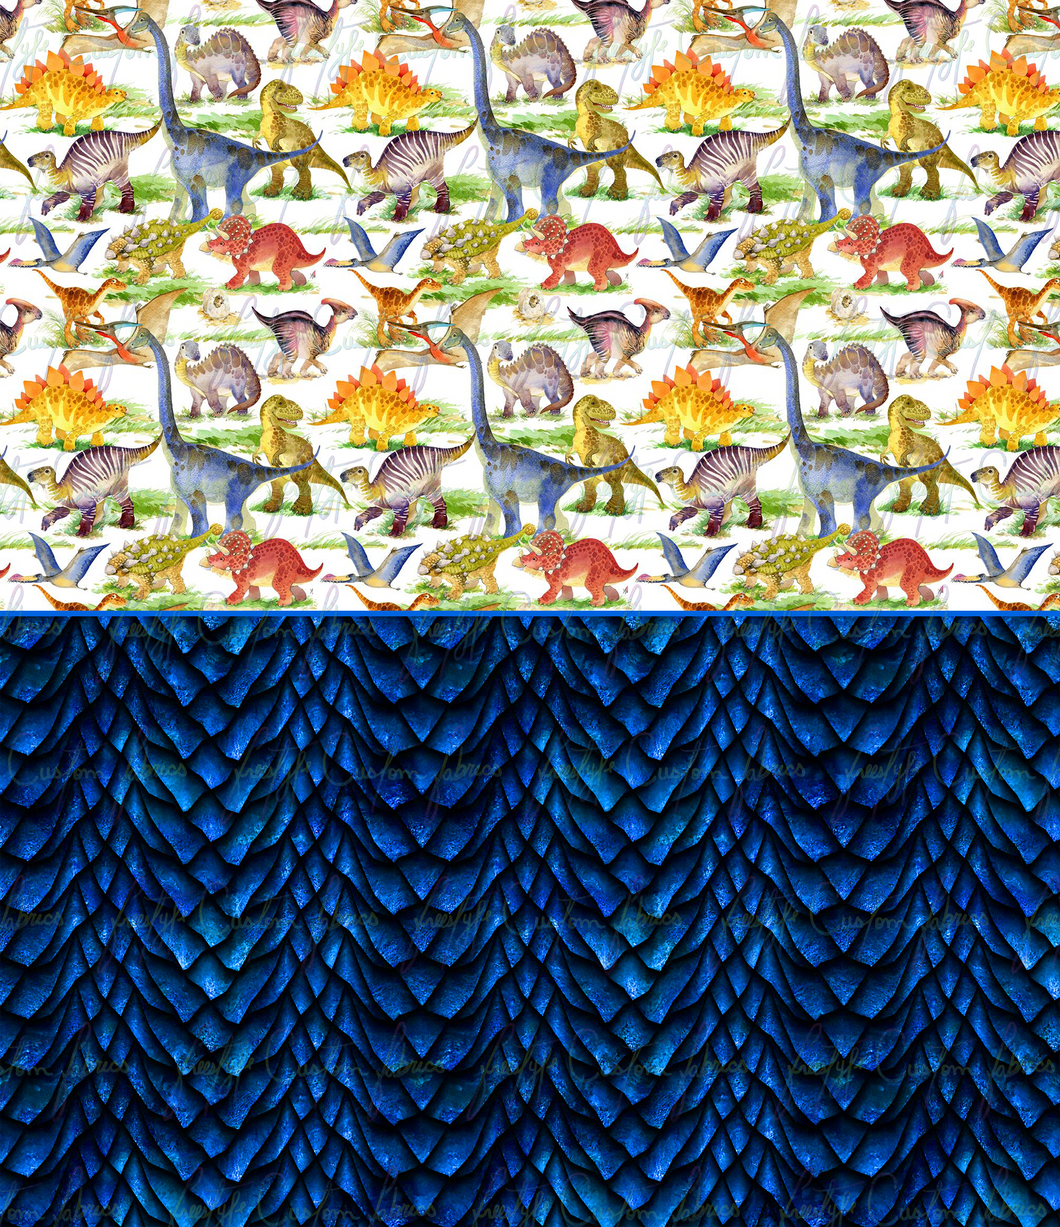 Blue Scale Dino Collage